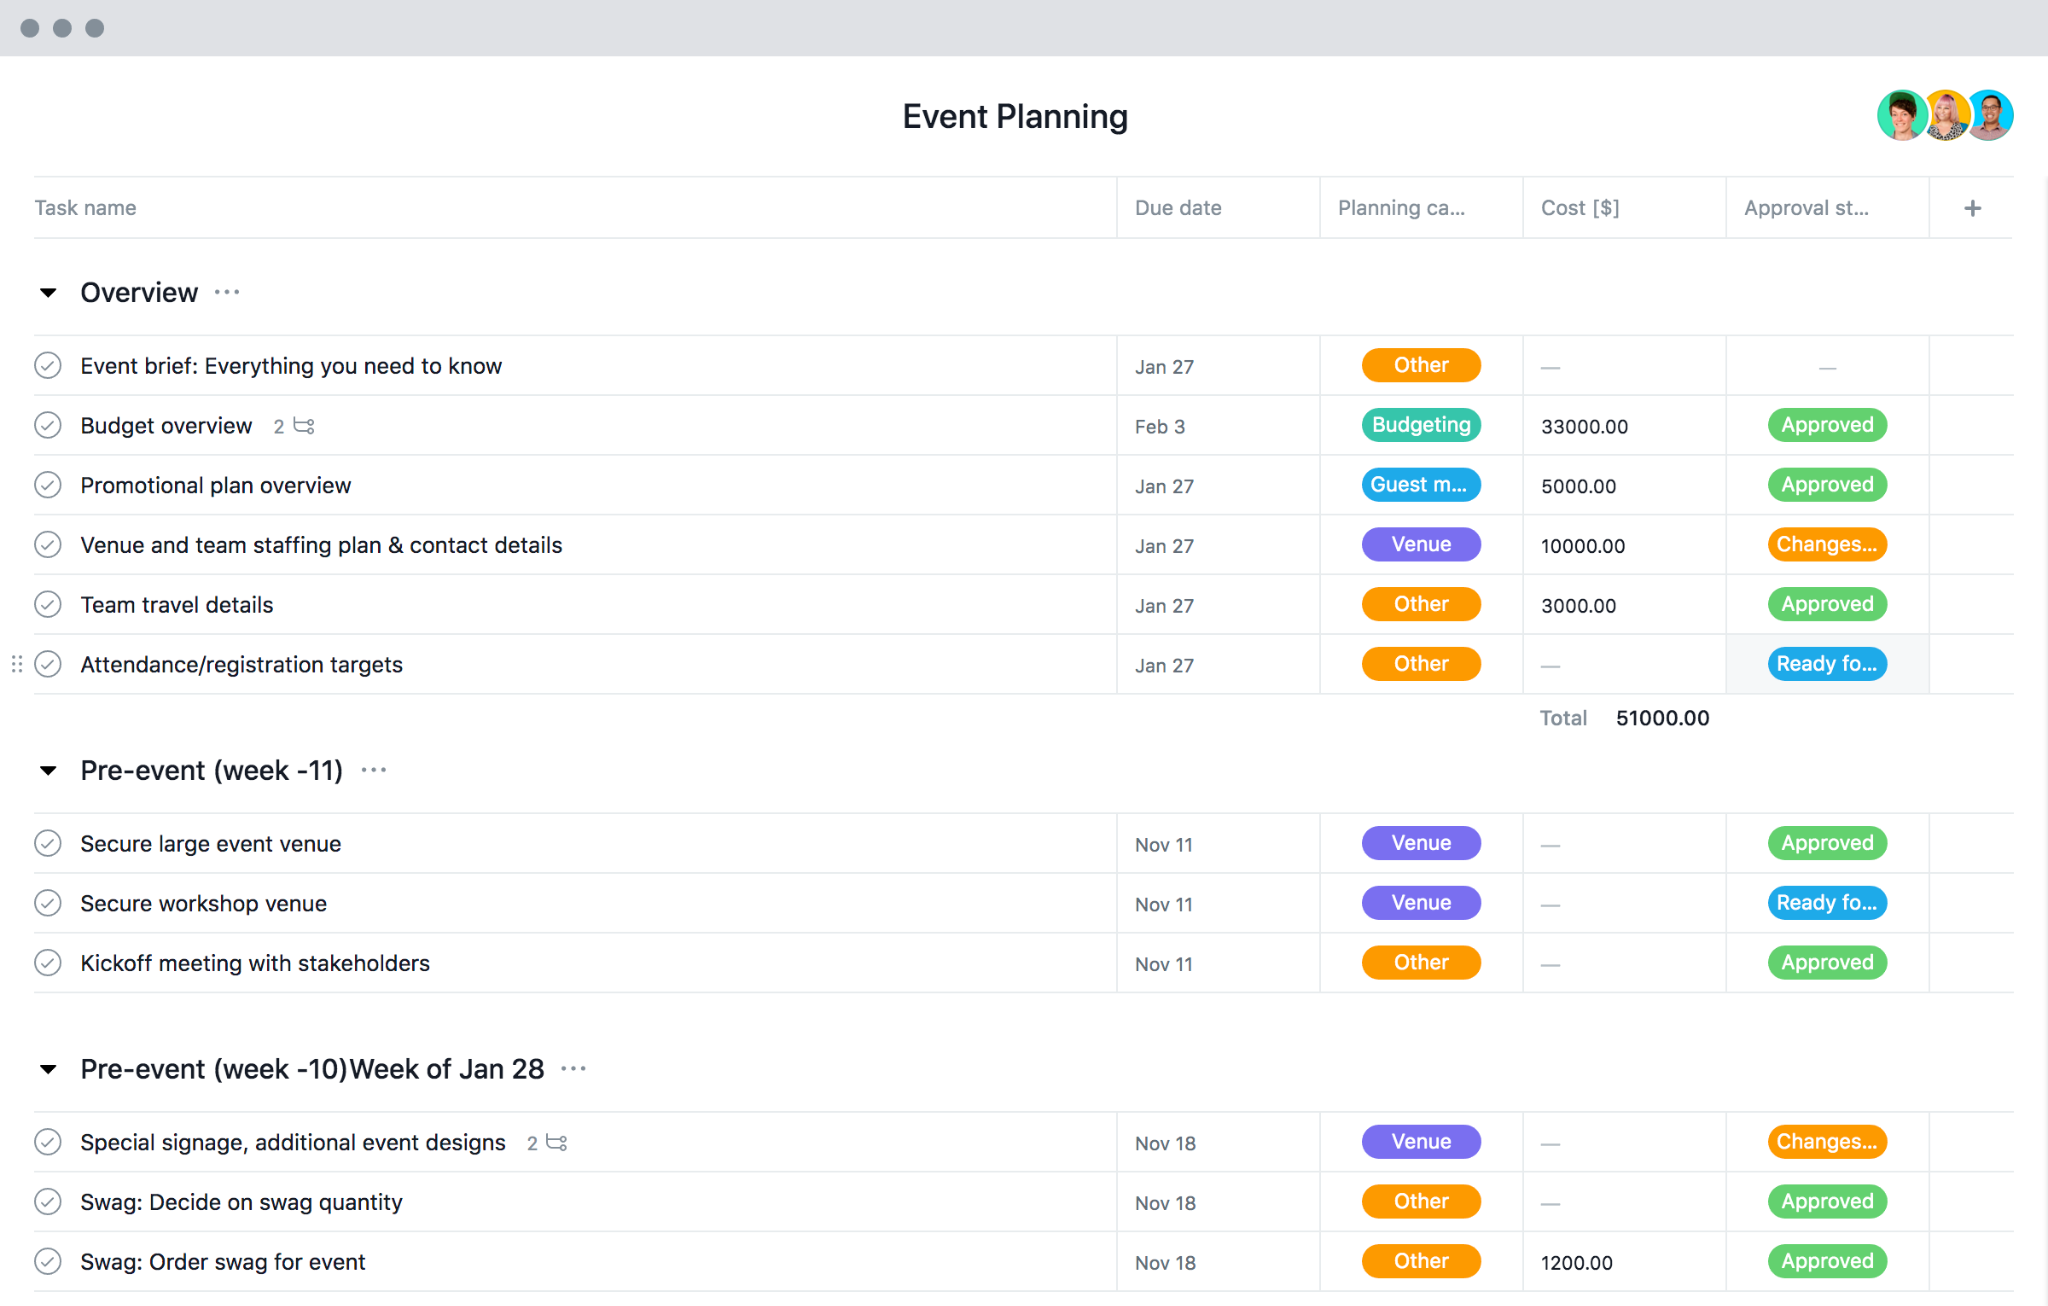 event-planning-template-in-Asana-that-includes-overview-tasks-and-pre-event-tasks-by-week